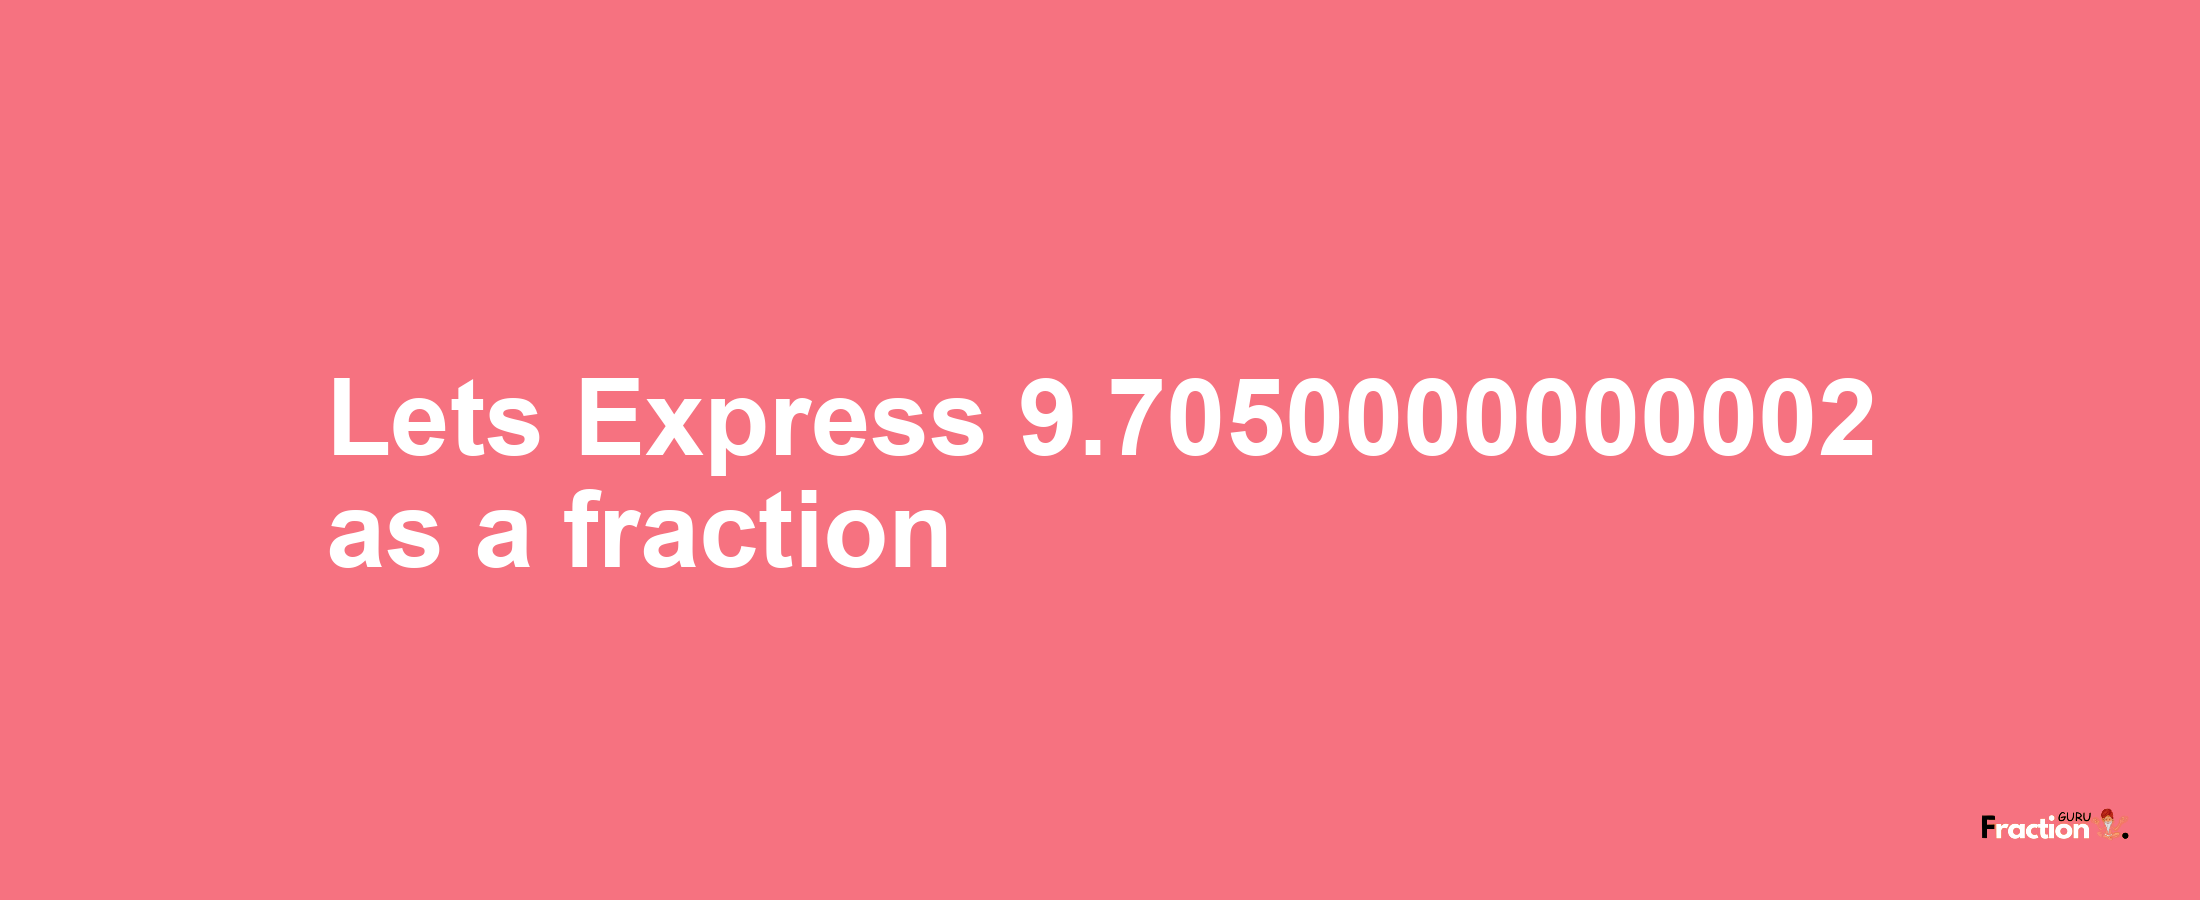 Lets Express 9.7050000000002 as afraction